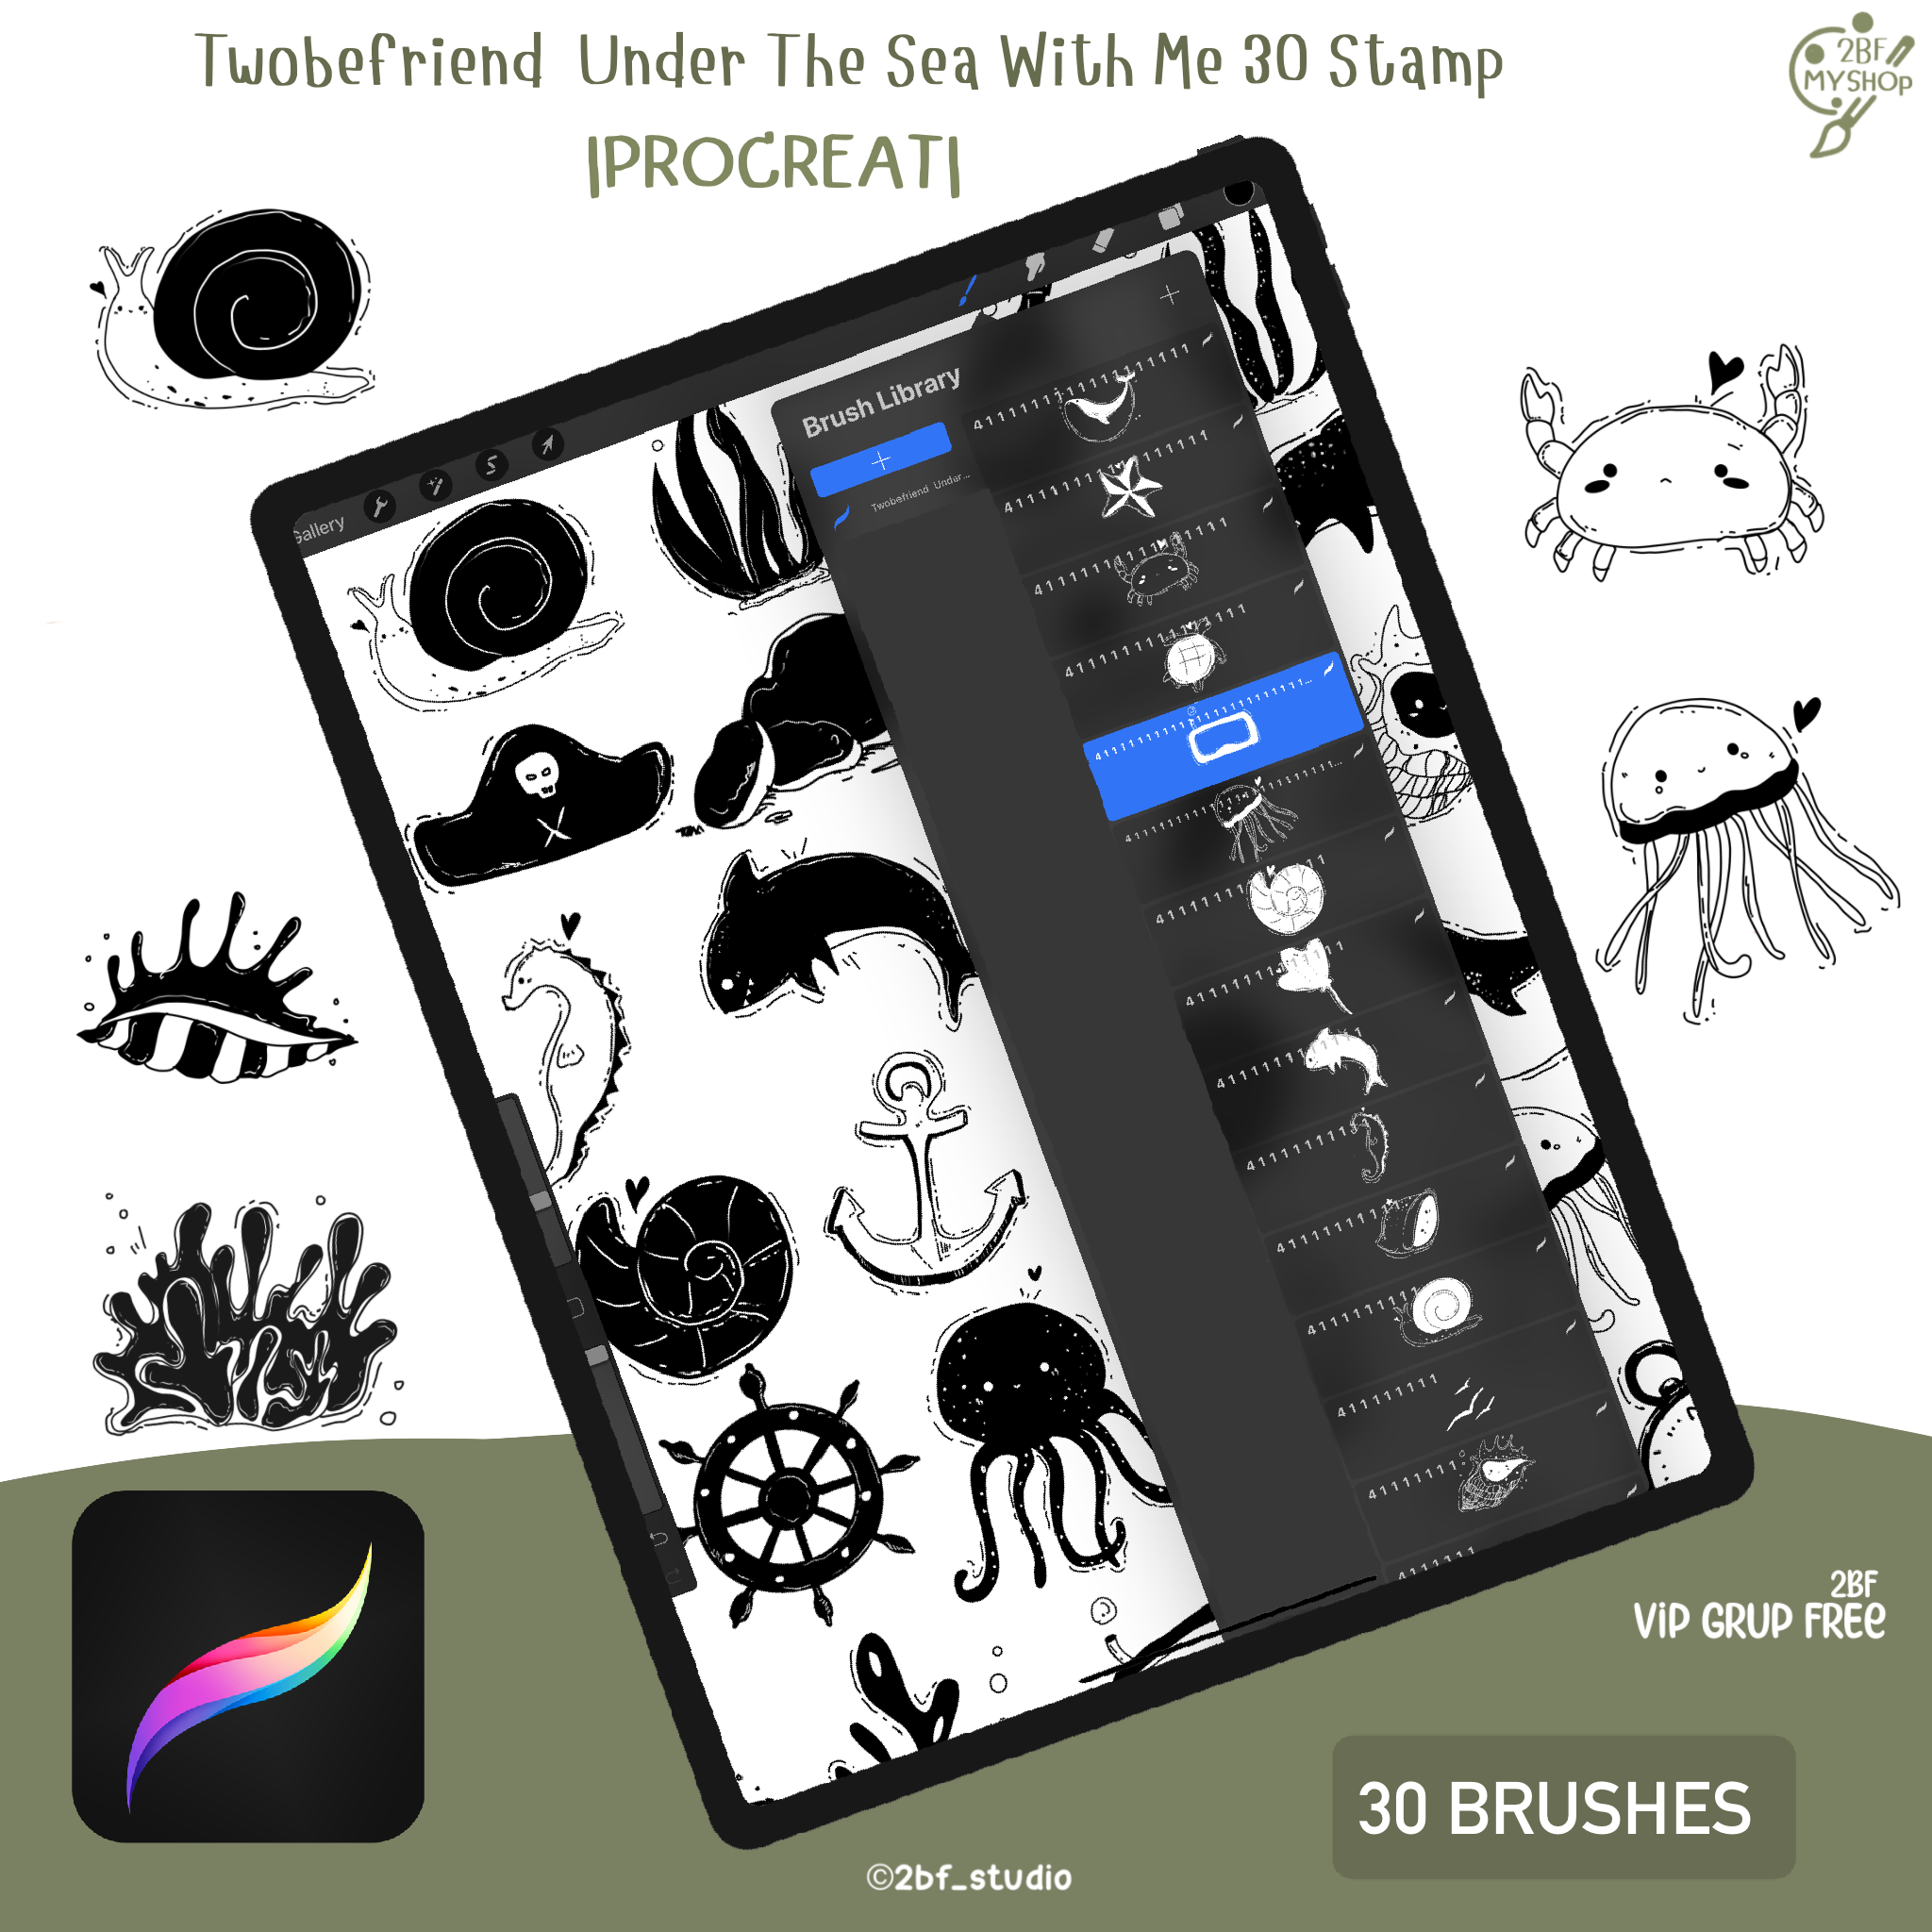 Twobefriend  Under The Sea With Me 30 Stamp   |PROCREAT BRUSHED|